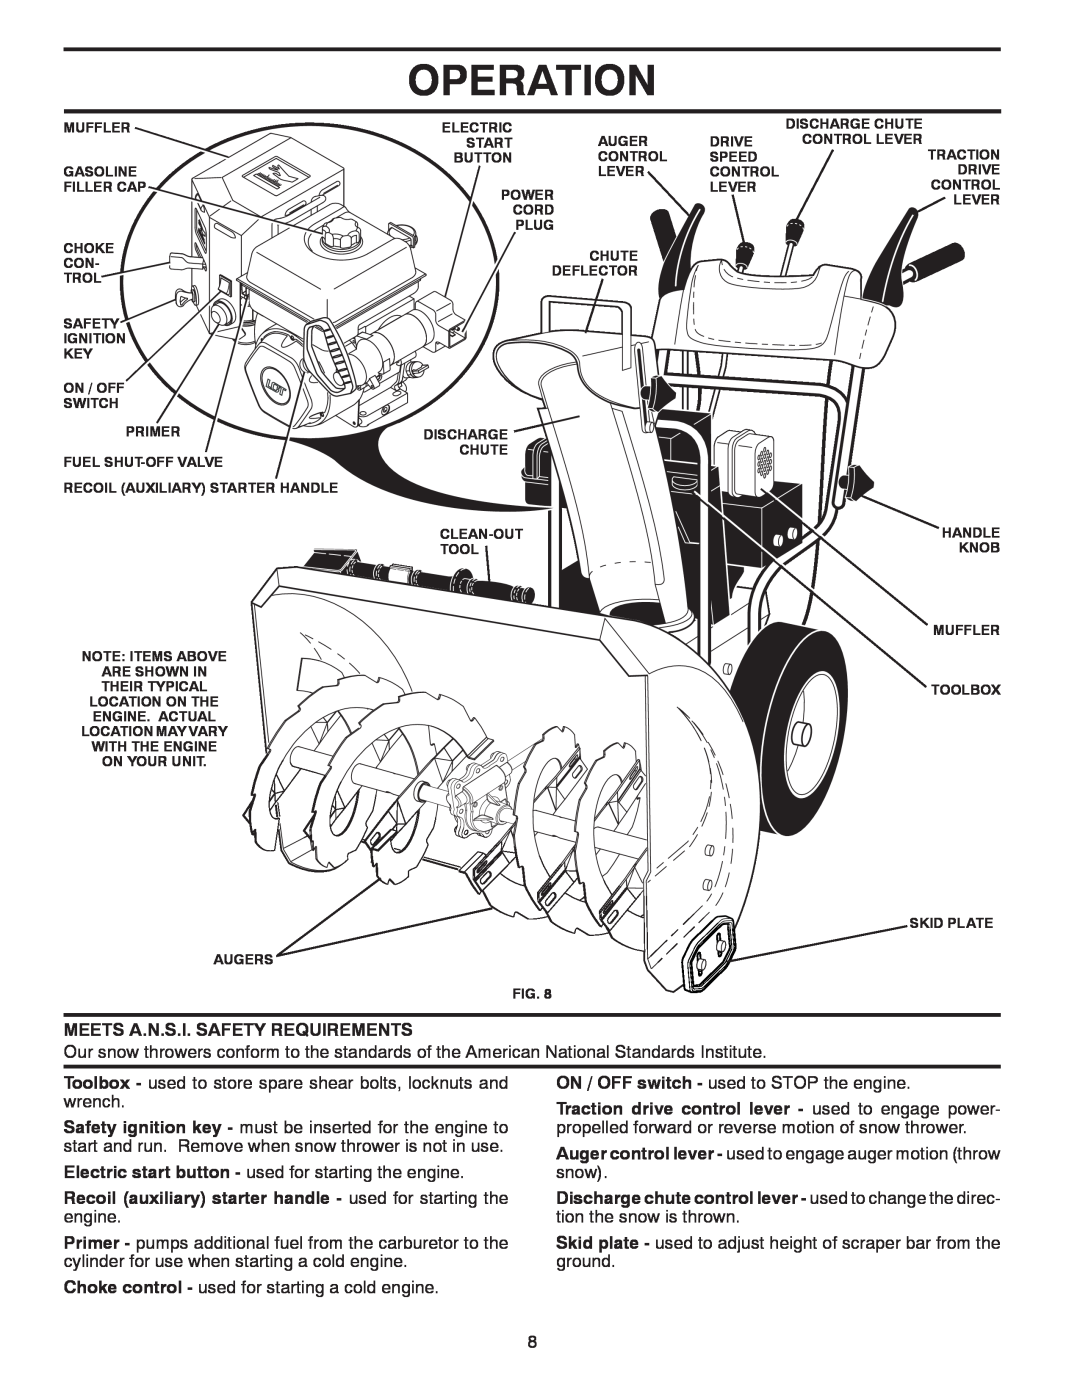 Poulan P14530ES owner manual Operation, Meets A.N.S.I. Safety Requirements, Choke control - used for starting a cold engine 